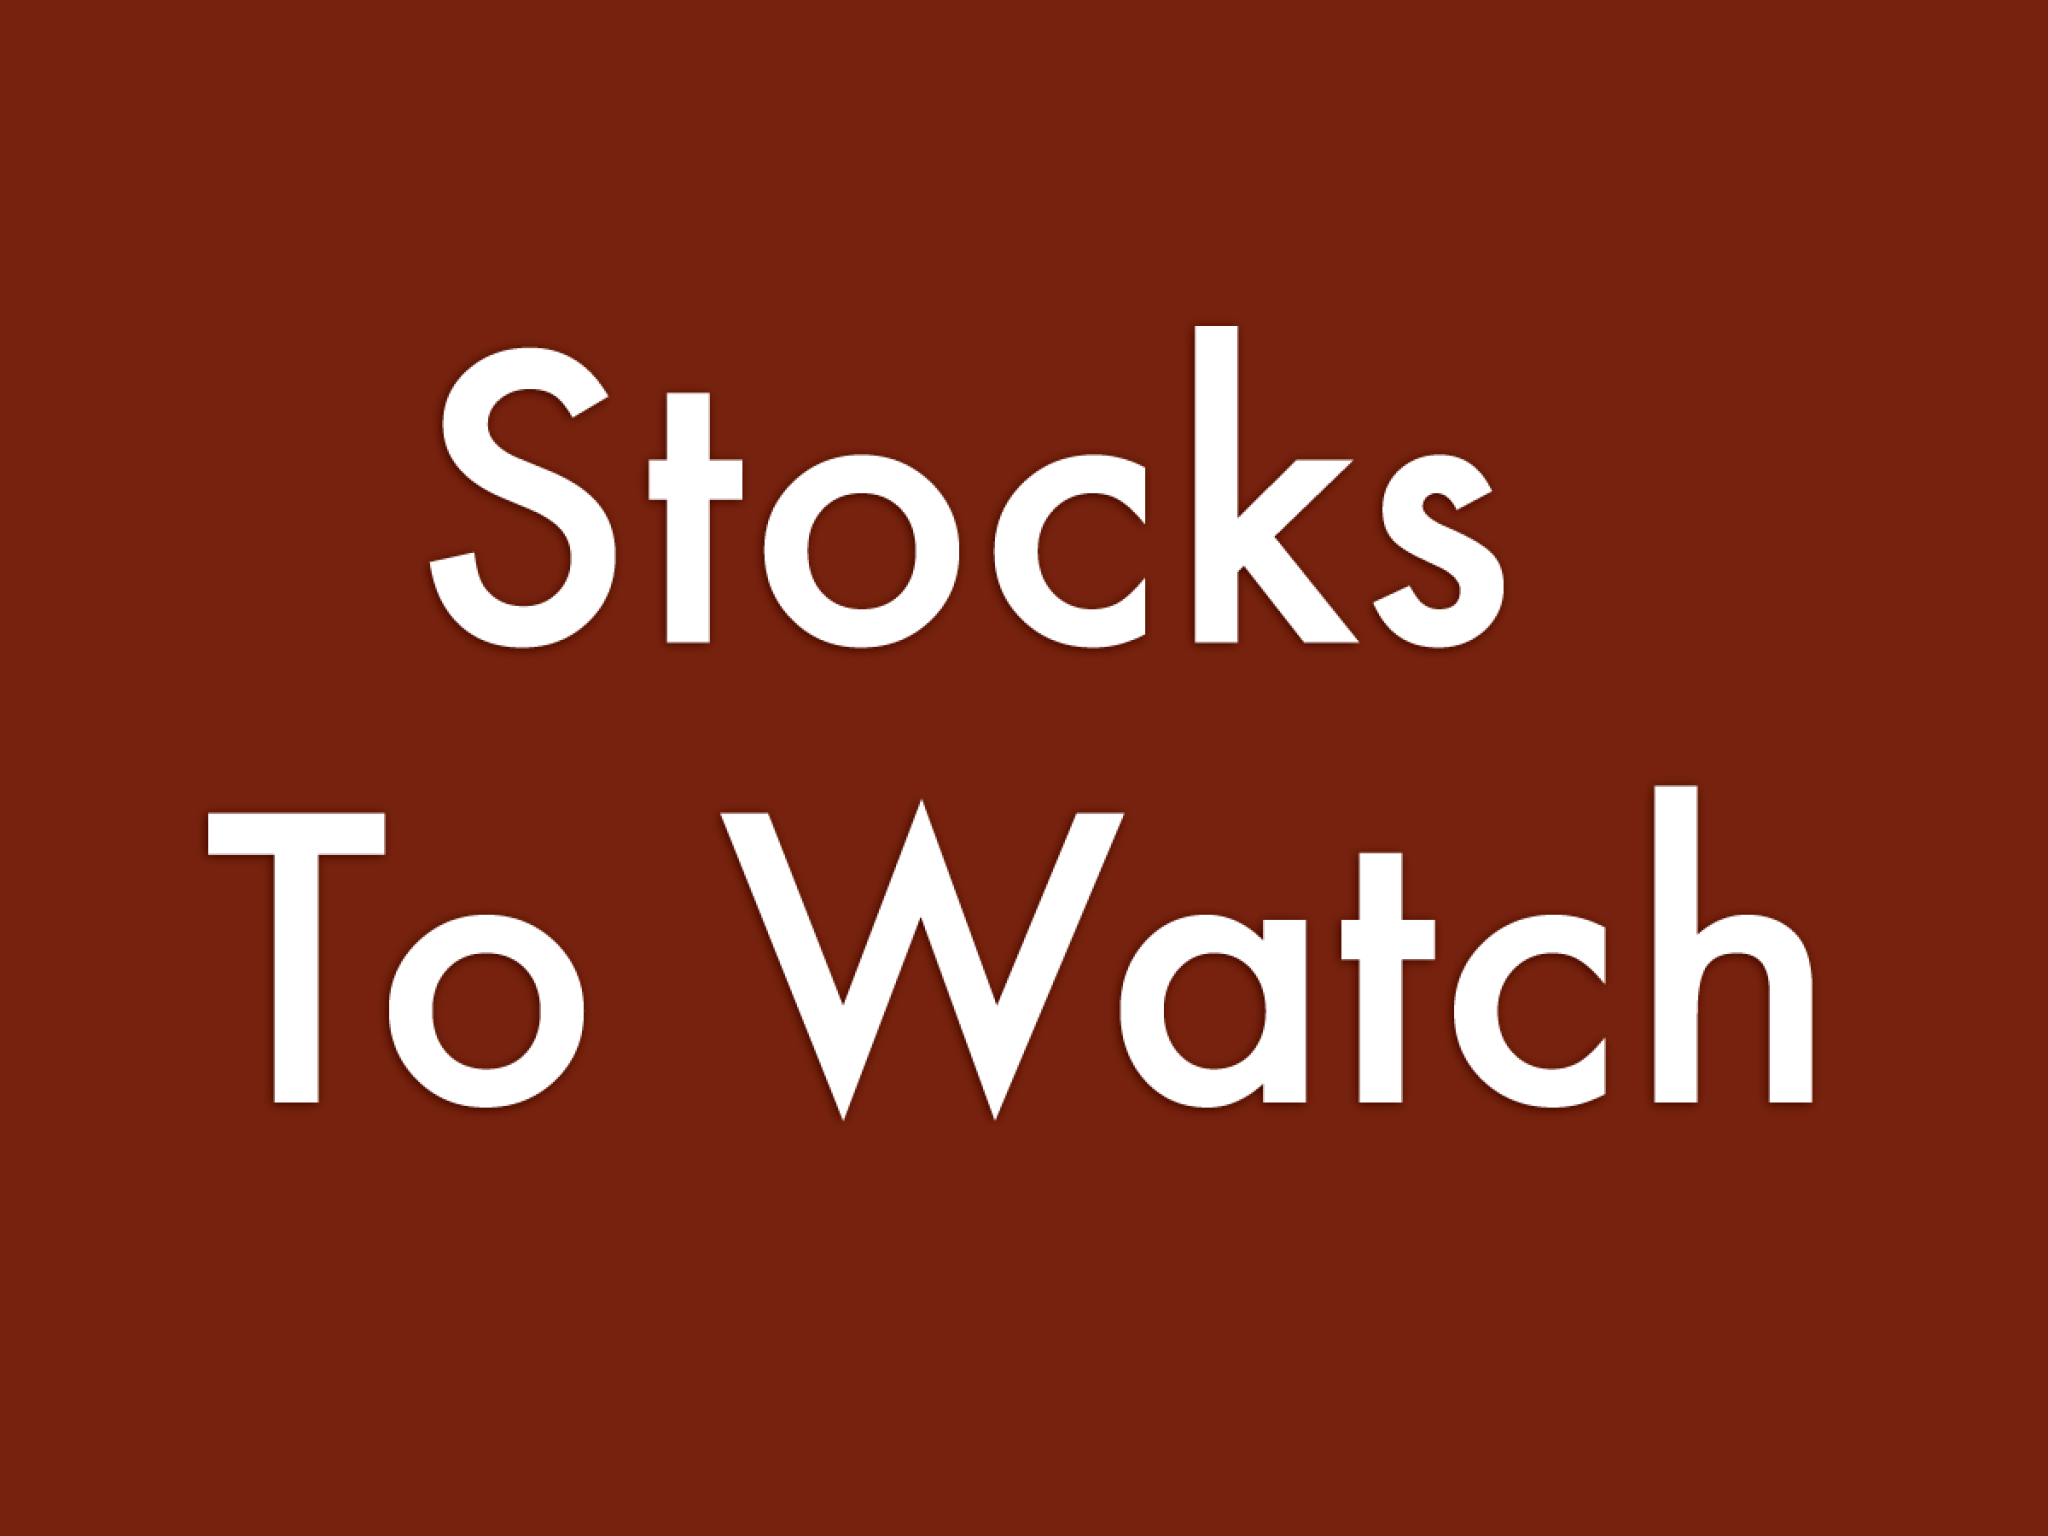  5-stocks-to-watch-for-september-27-2021 